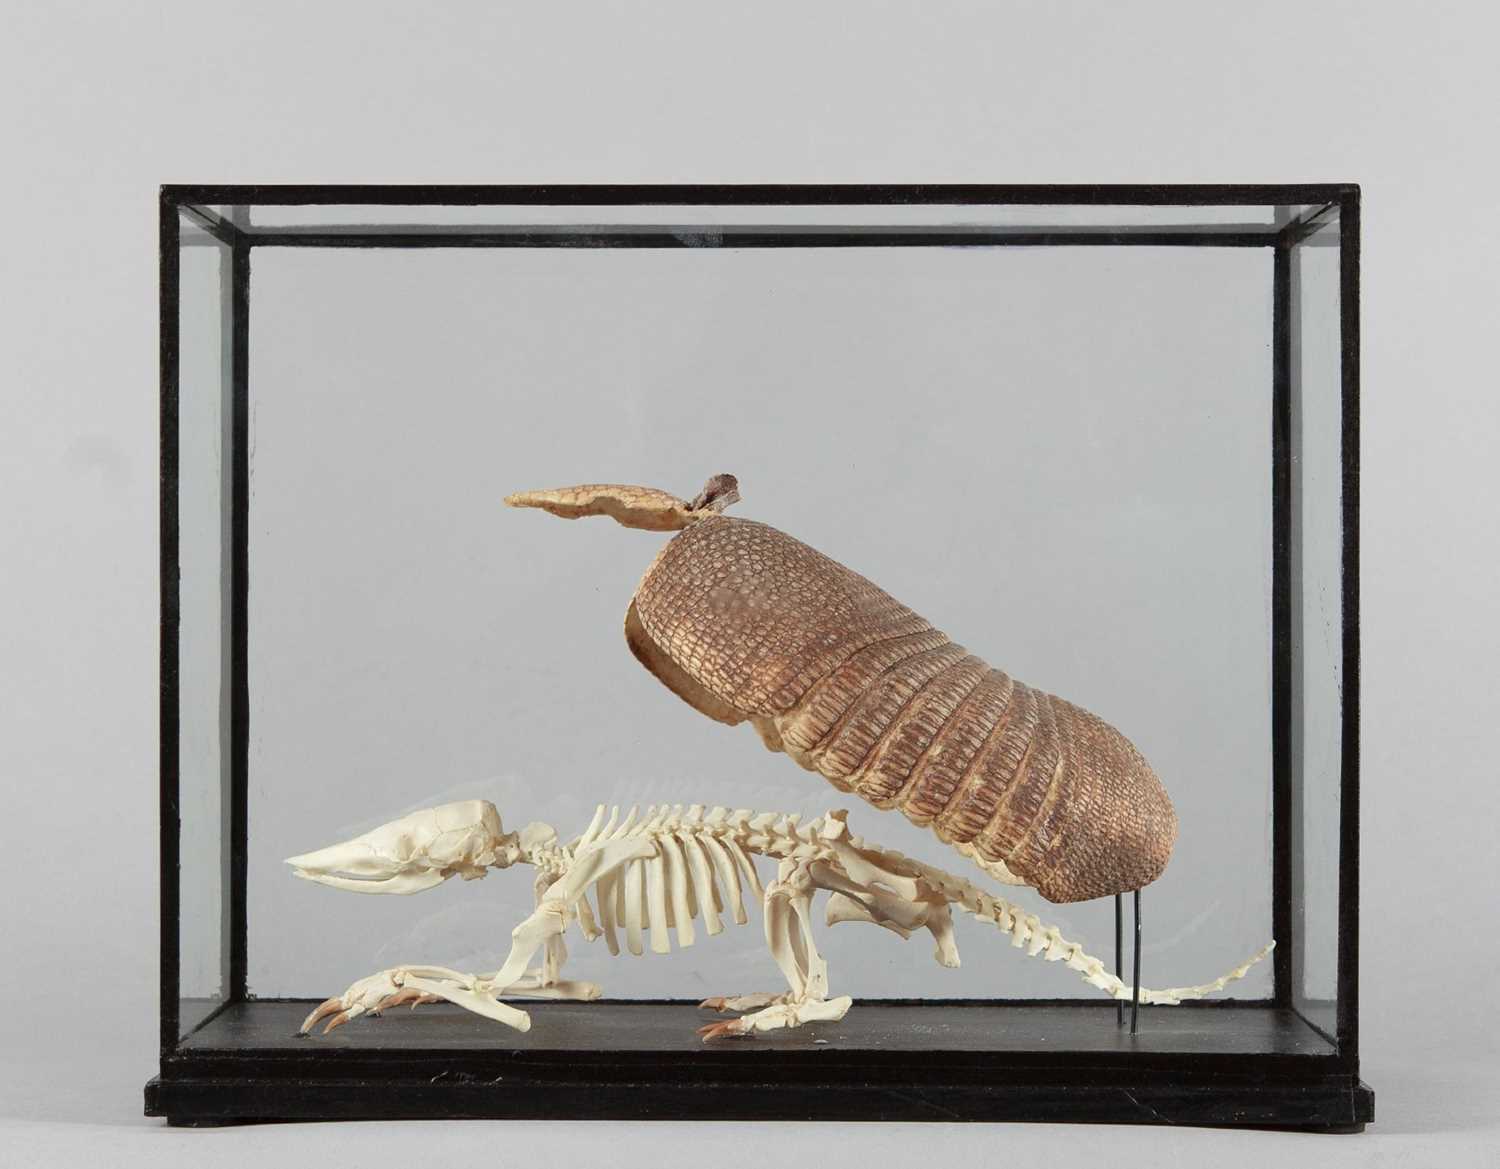 Skeletons/Anatomy: A Cased Banded Armadillo Skeleton and Carapace, modern, a complete articulated